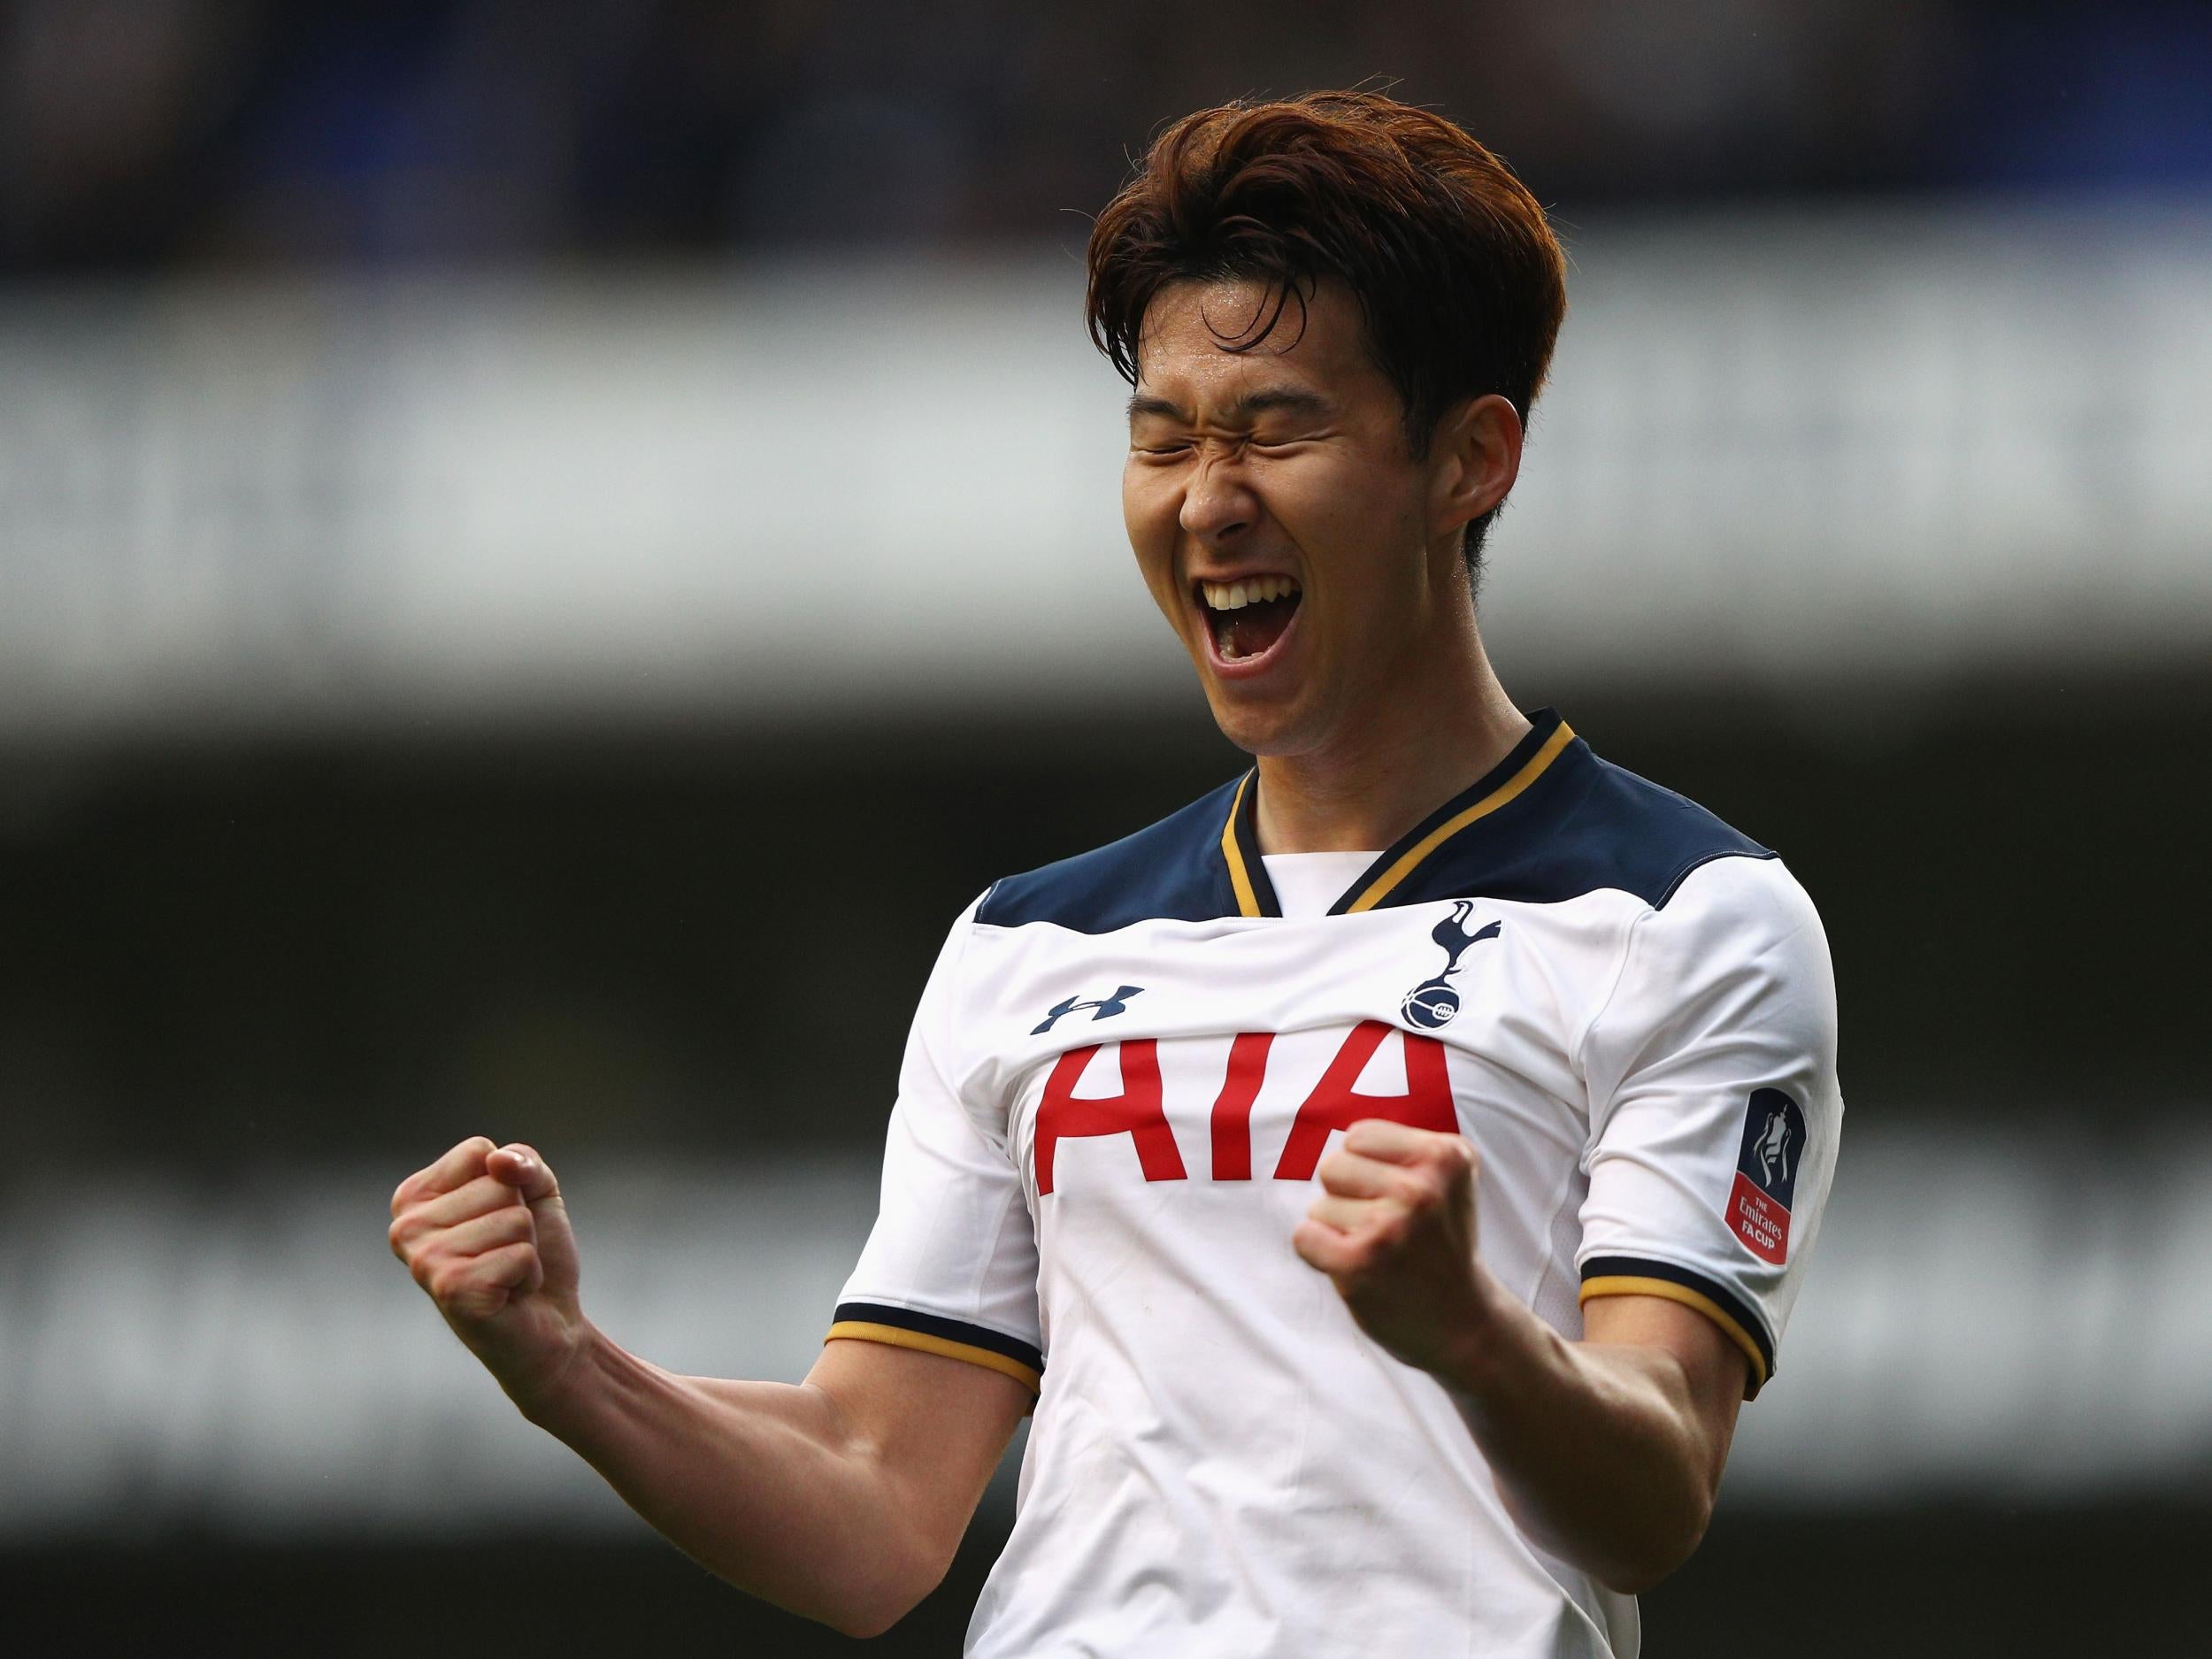 Heung-Min Son could be a key player in Harry Kane's absence